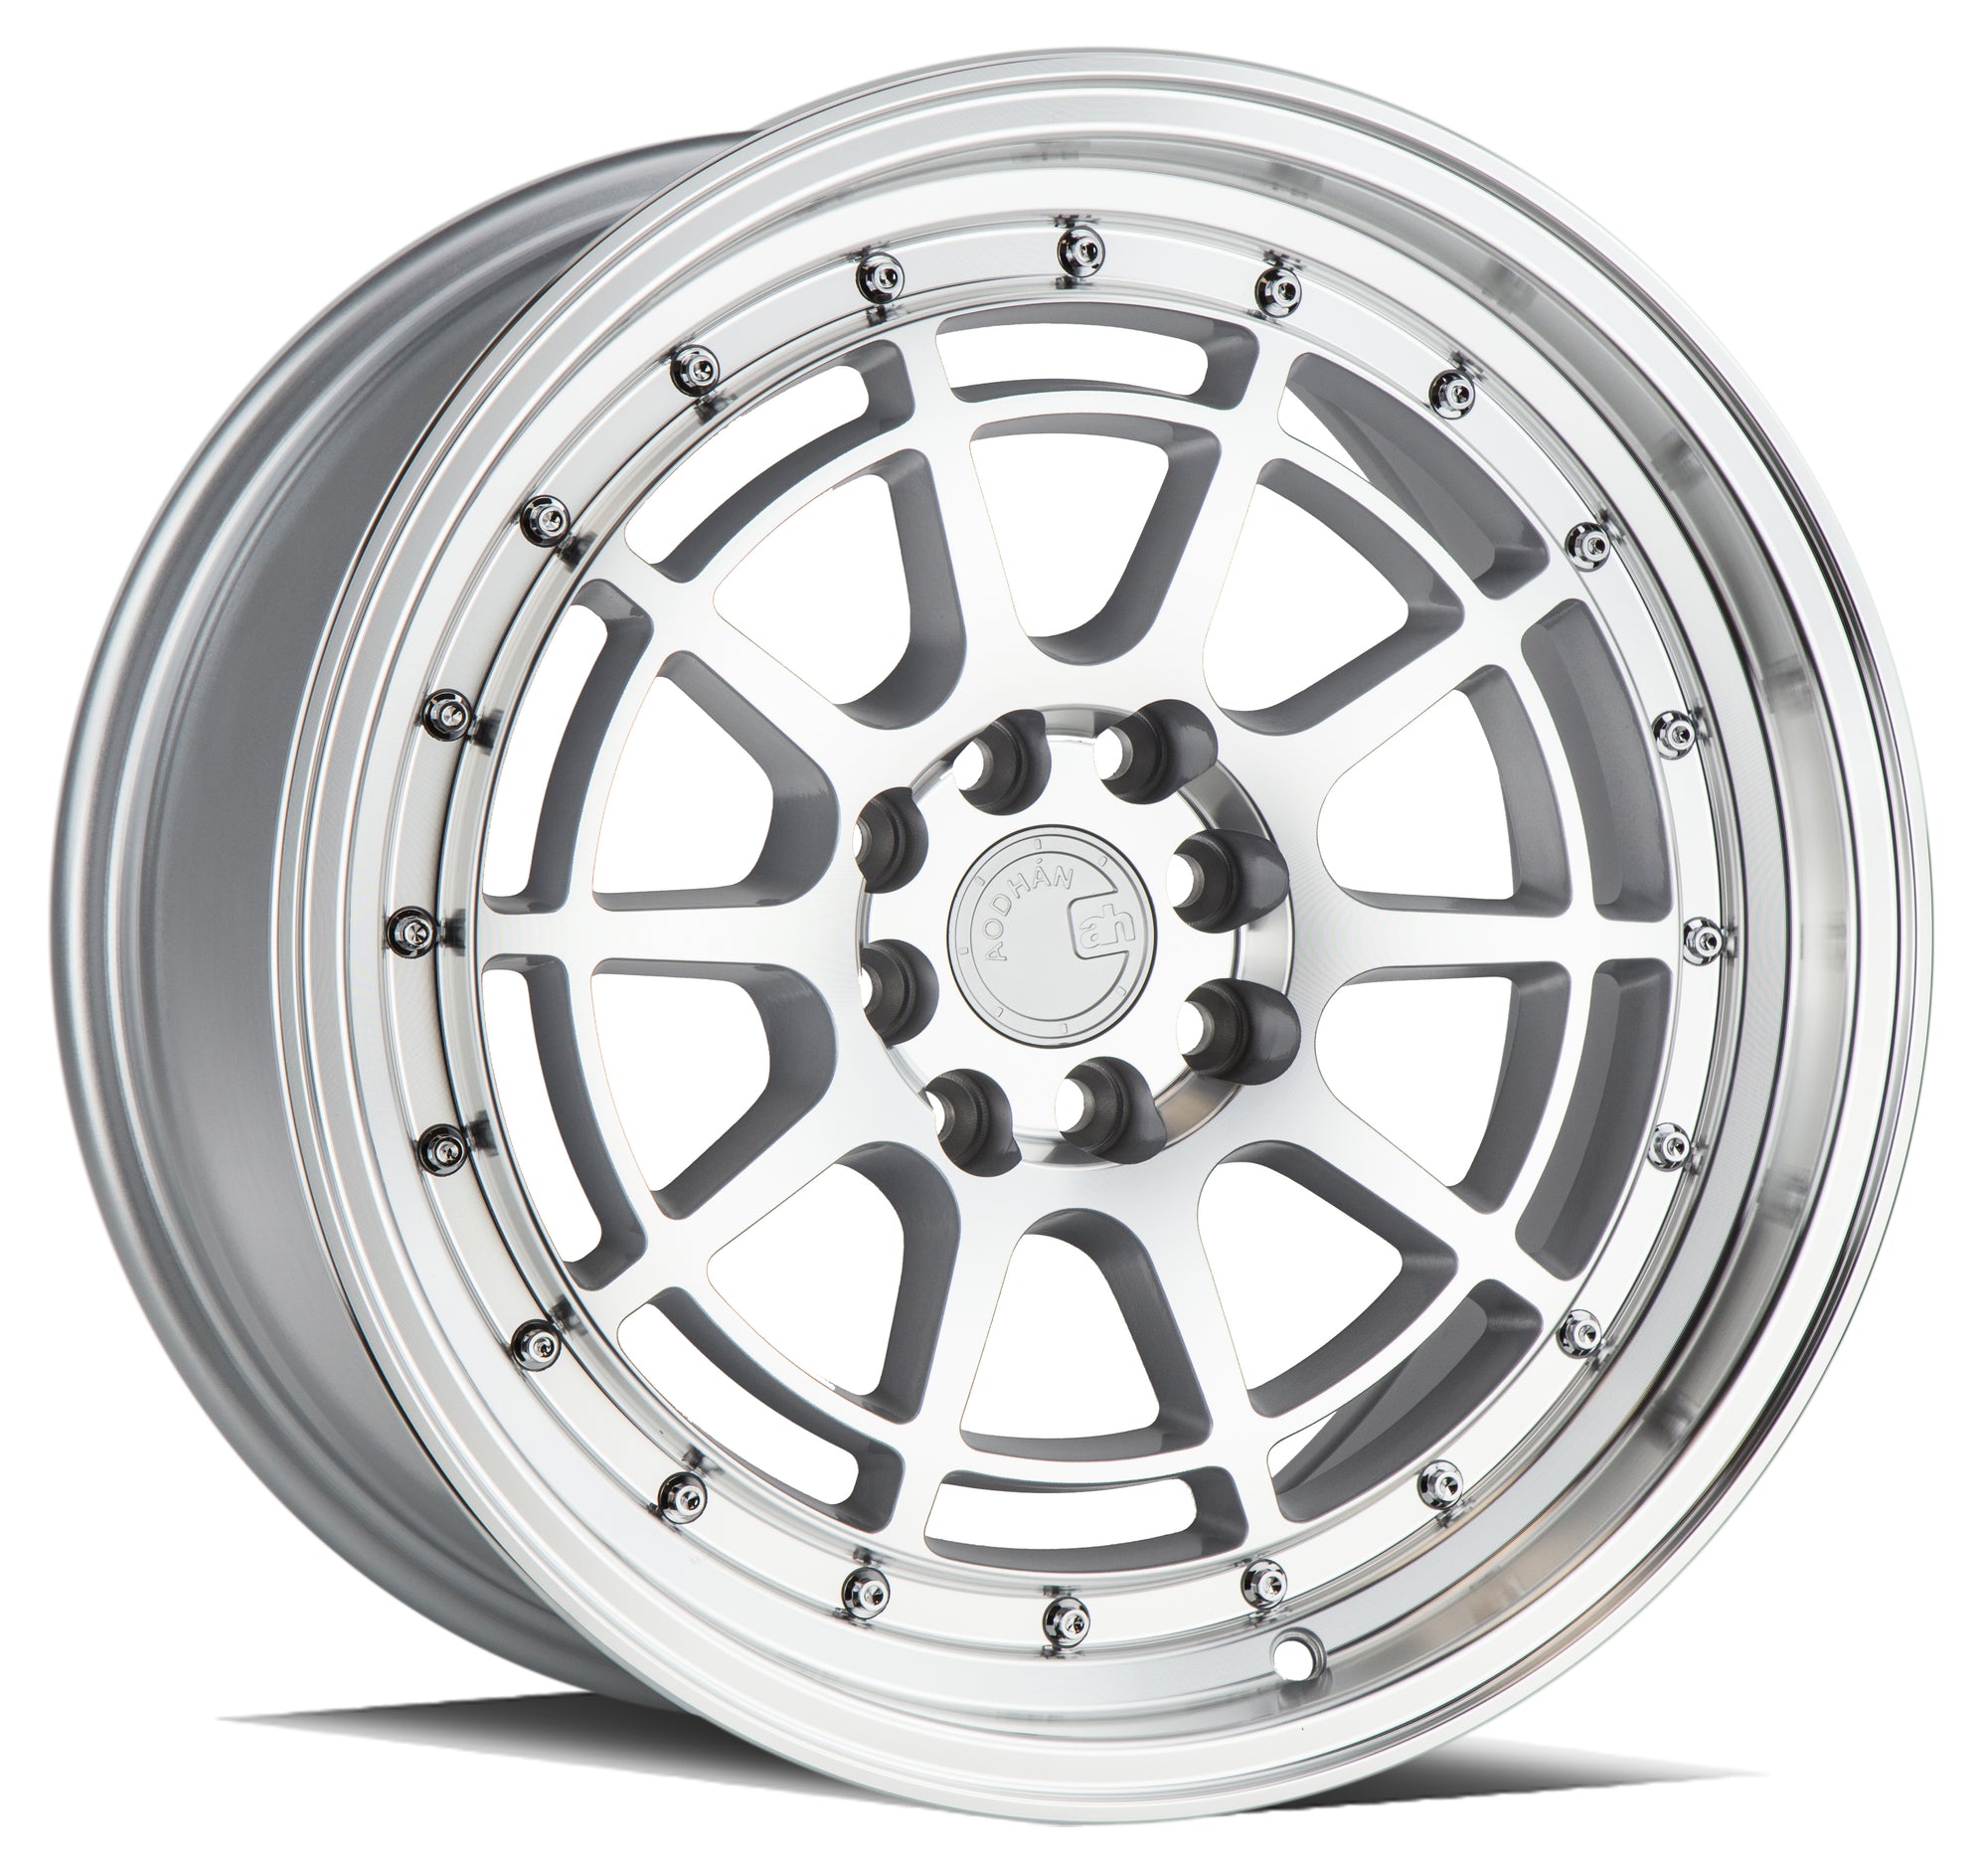 Aodhan AH04 17x9 4x100/114.3 +25 Silver Machined Face And Lip